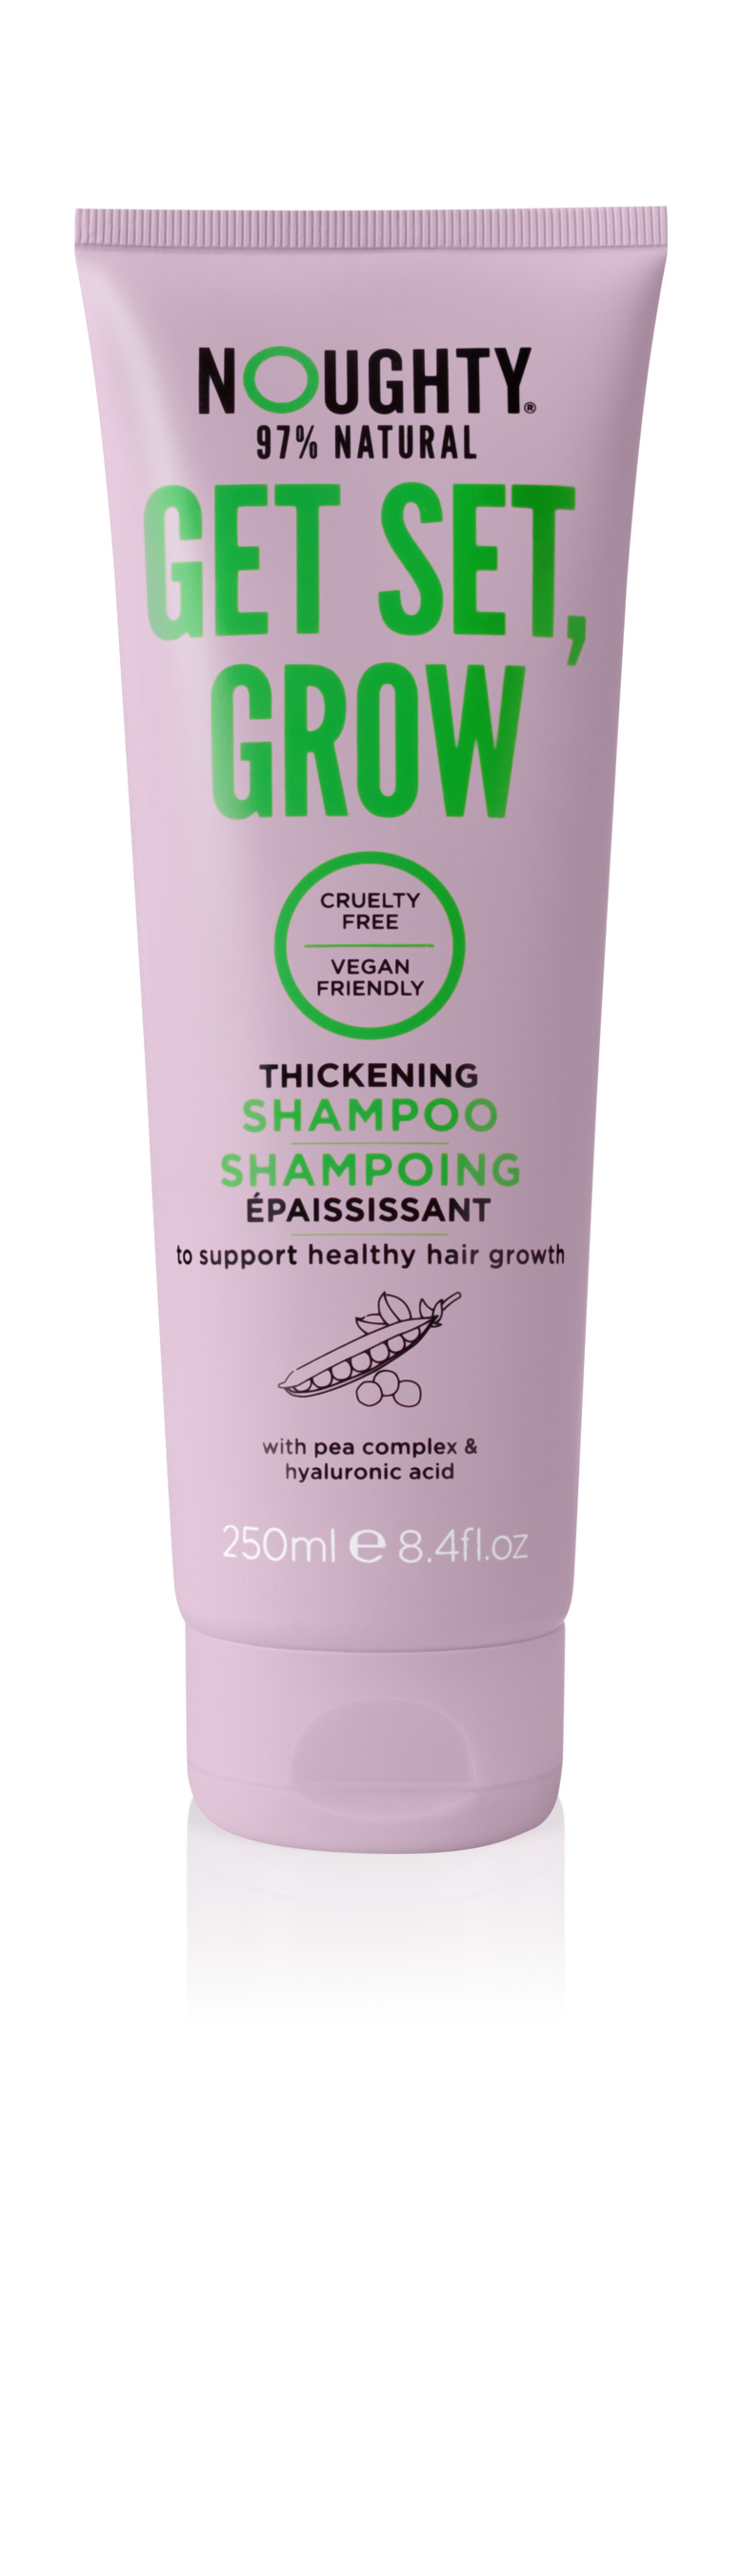 Noughty-Get-Set-Grow-Thickening-Shampoo